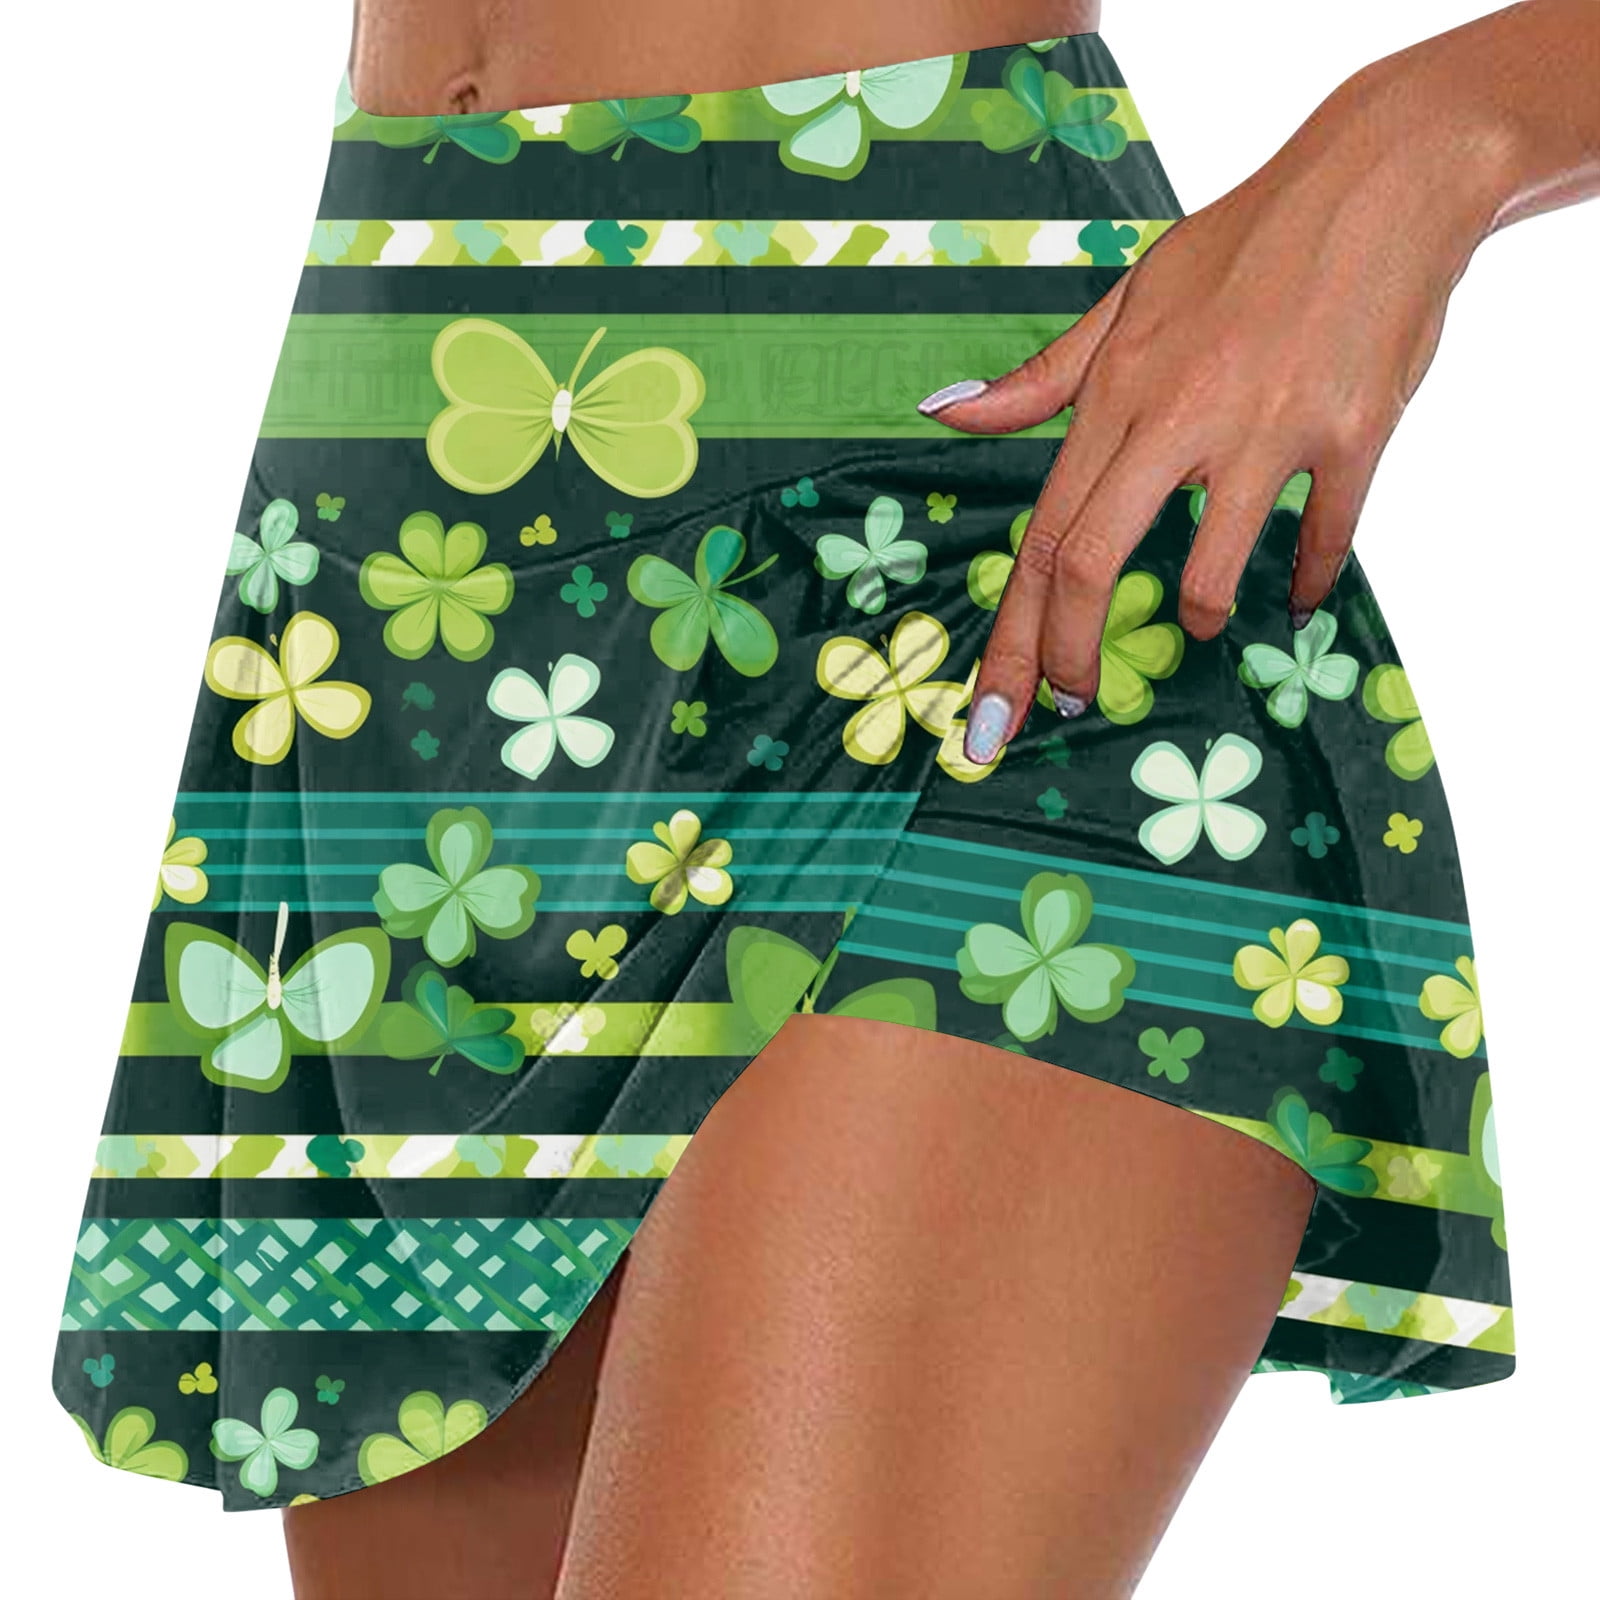 2 in 1 Flowy Running Shorts for Women St Patrick's Day High Waisted  Athletic Shorts Tennis Skirt Clover Graphic Yoga Skort